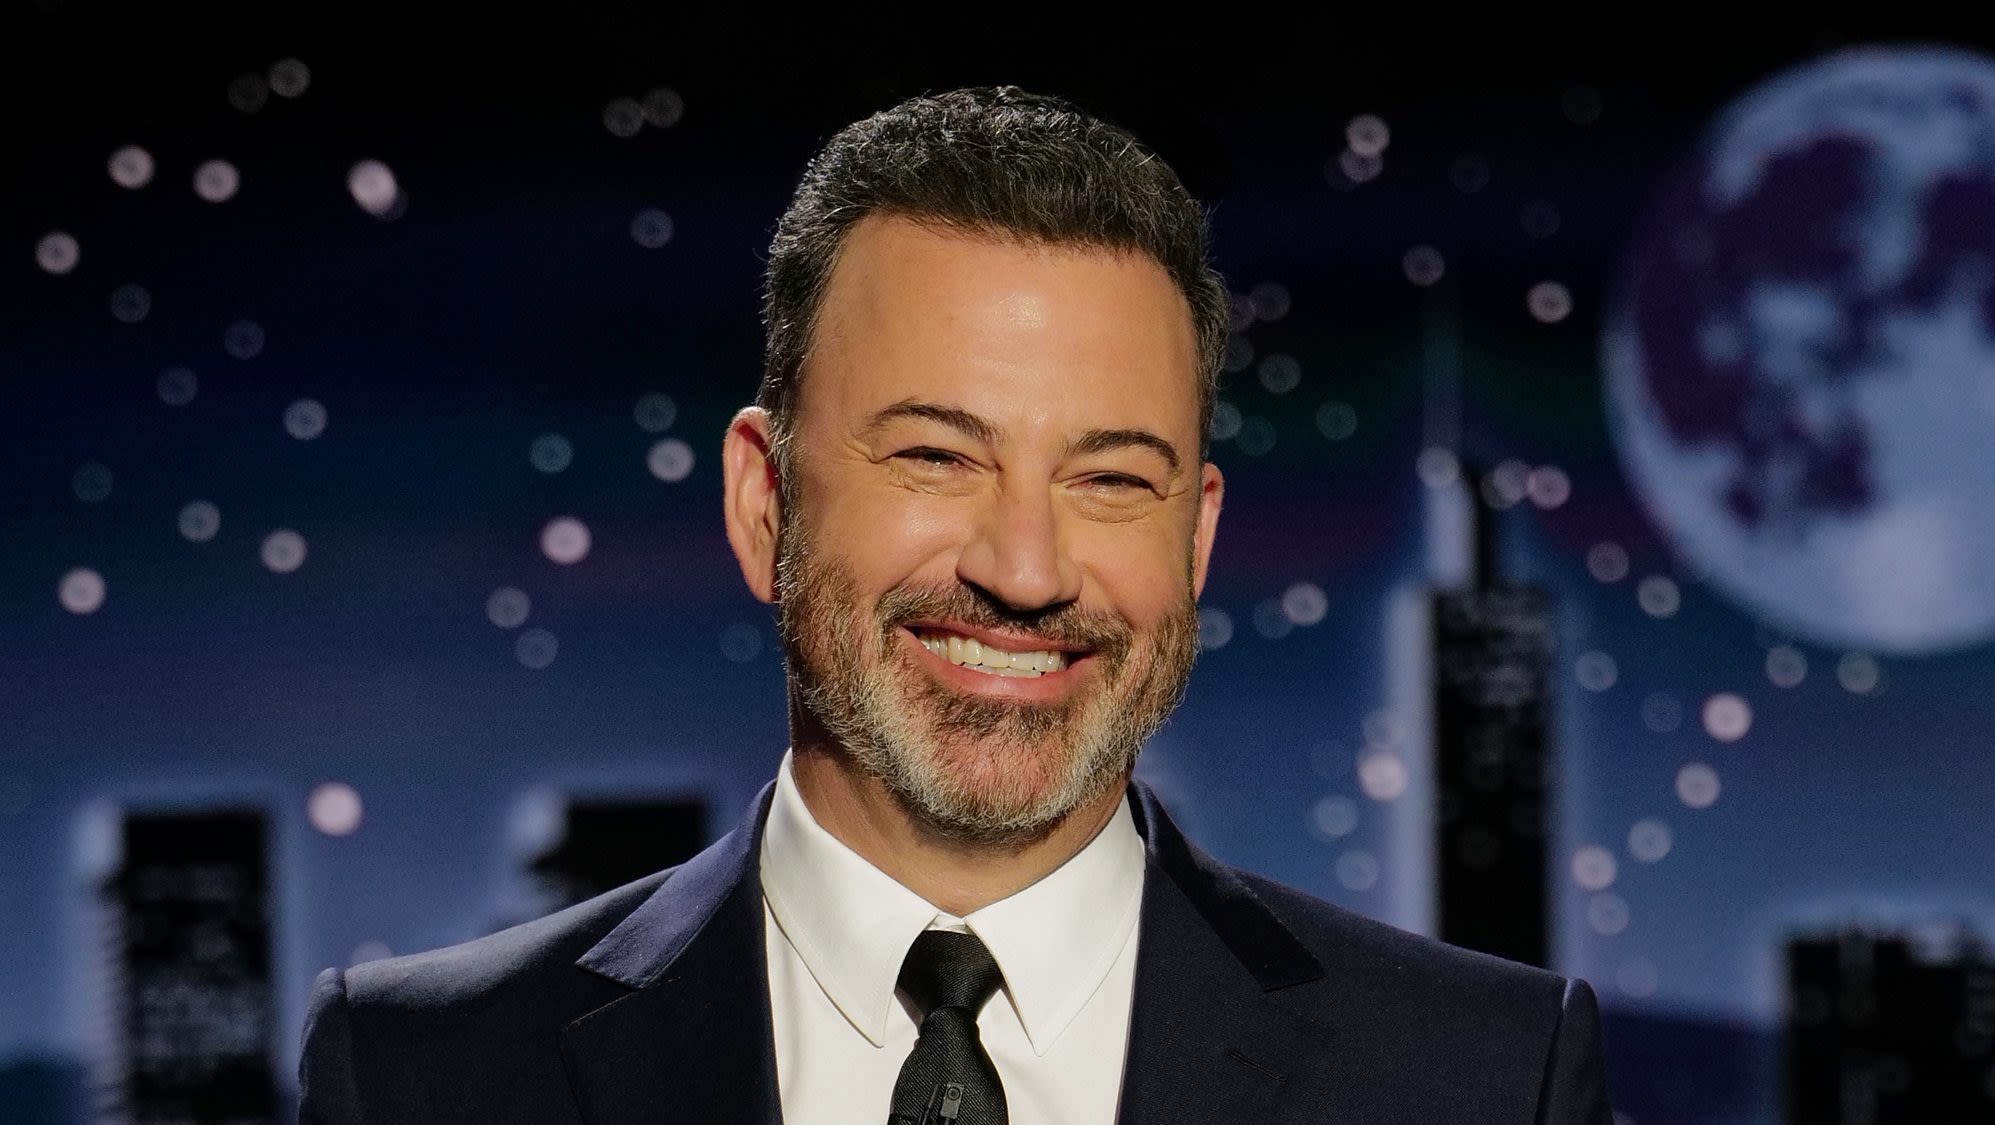 Jimmy Kimmel Roasts the Kardashians, Netflix and More at Upfronts: ‘There Are More FBI Agents on CBS Than Were at Diddy’s House’